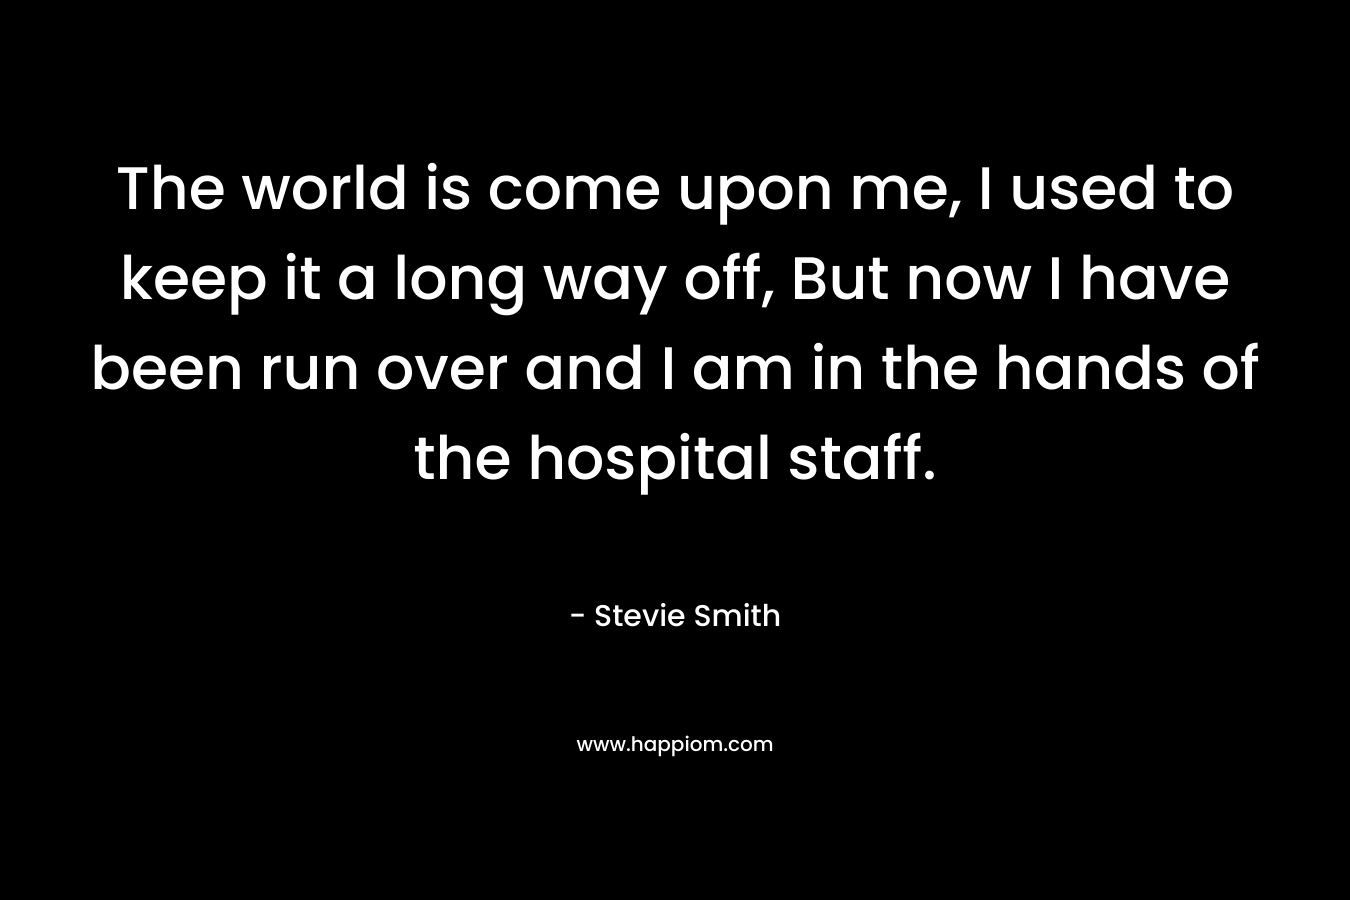 The world is come upon me, I used to keep it a long way off, But now I have been run over and I am in the hands of the hospital staff.